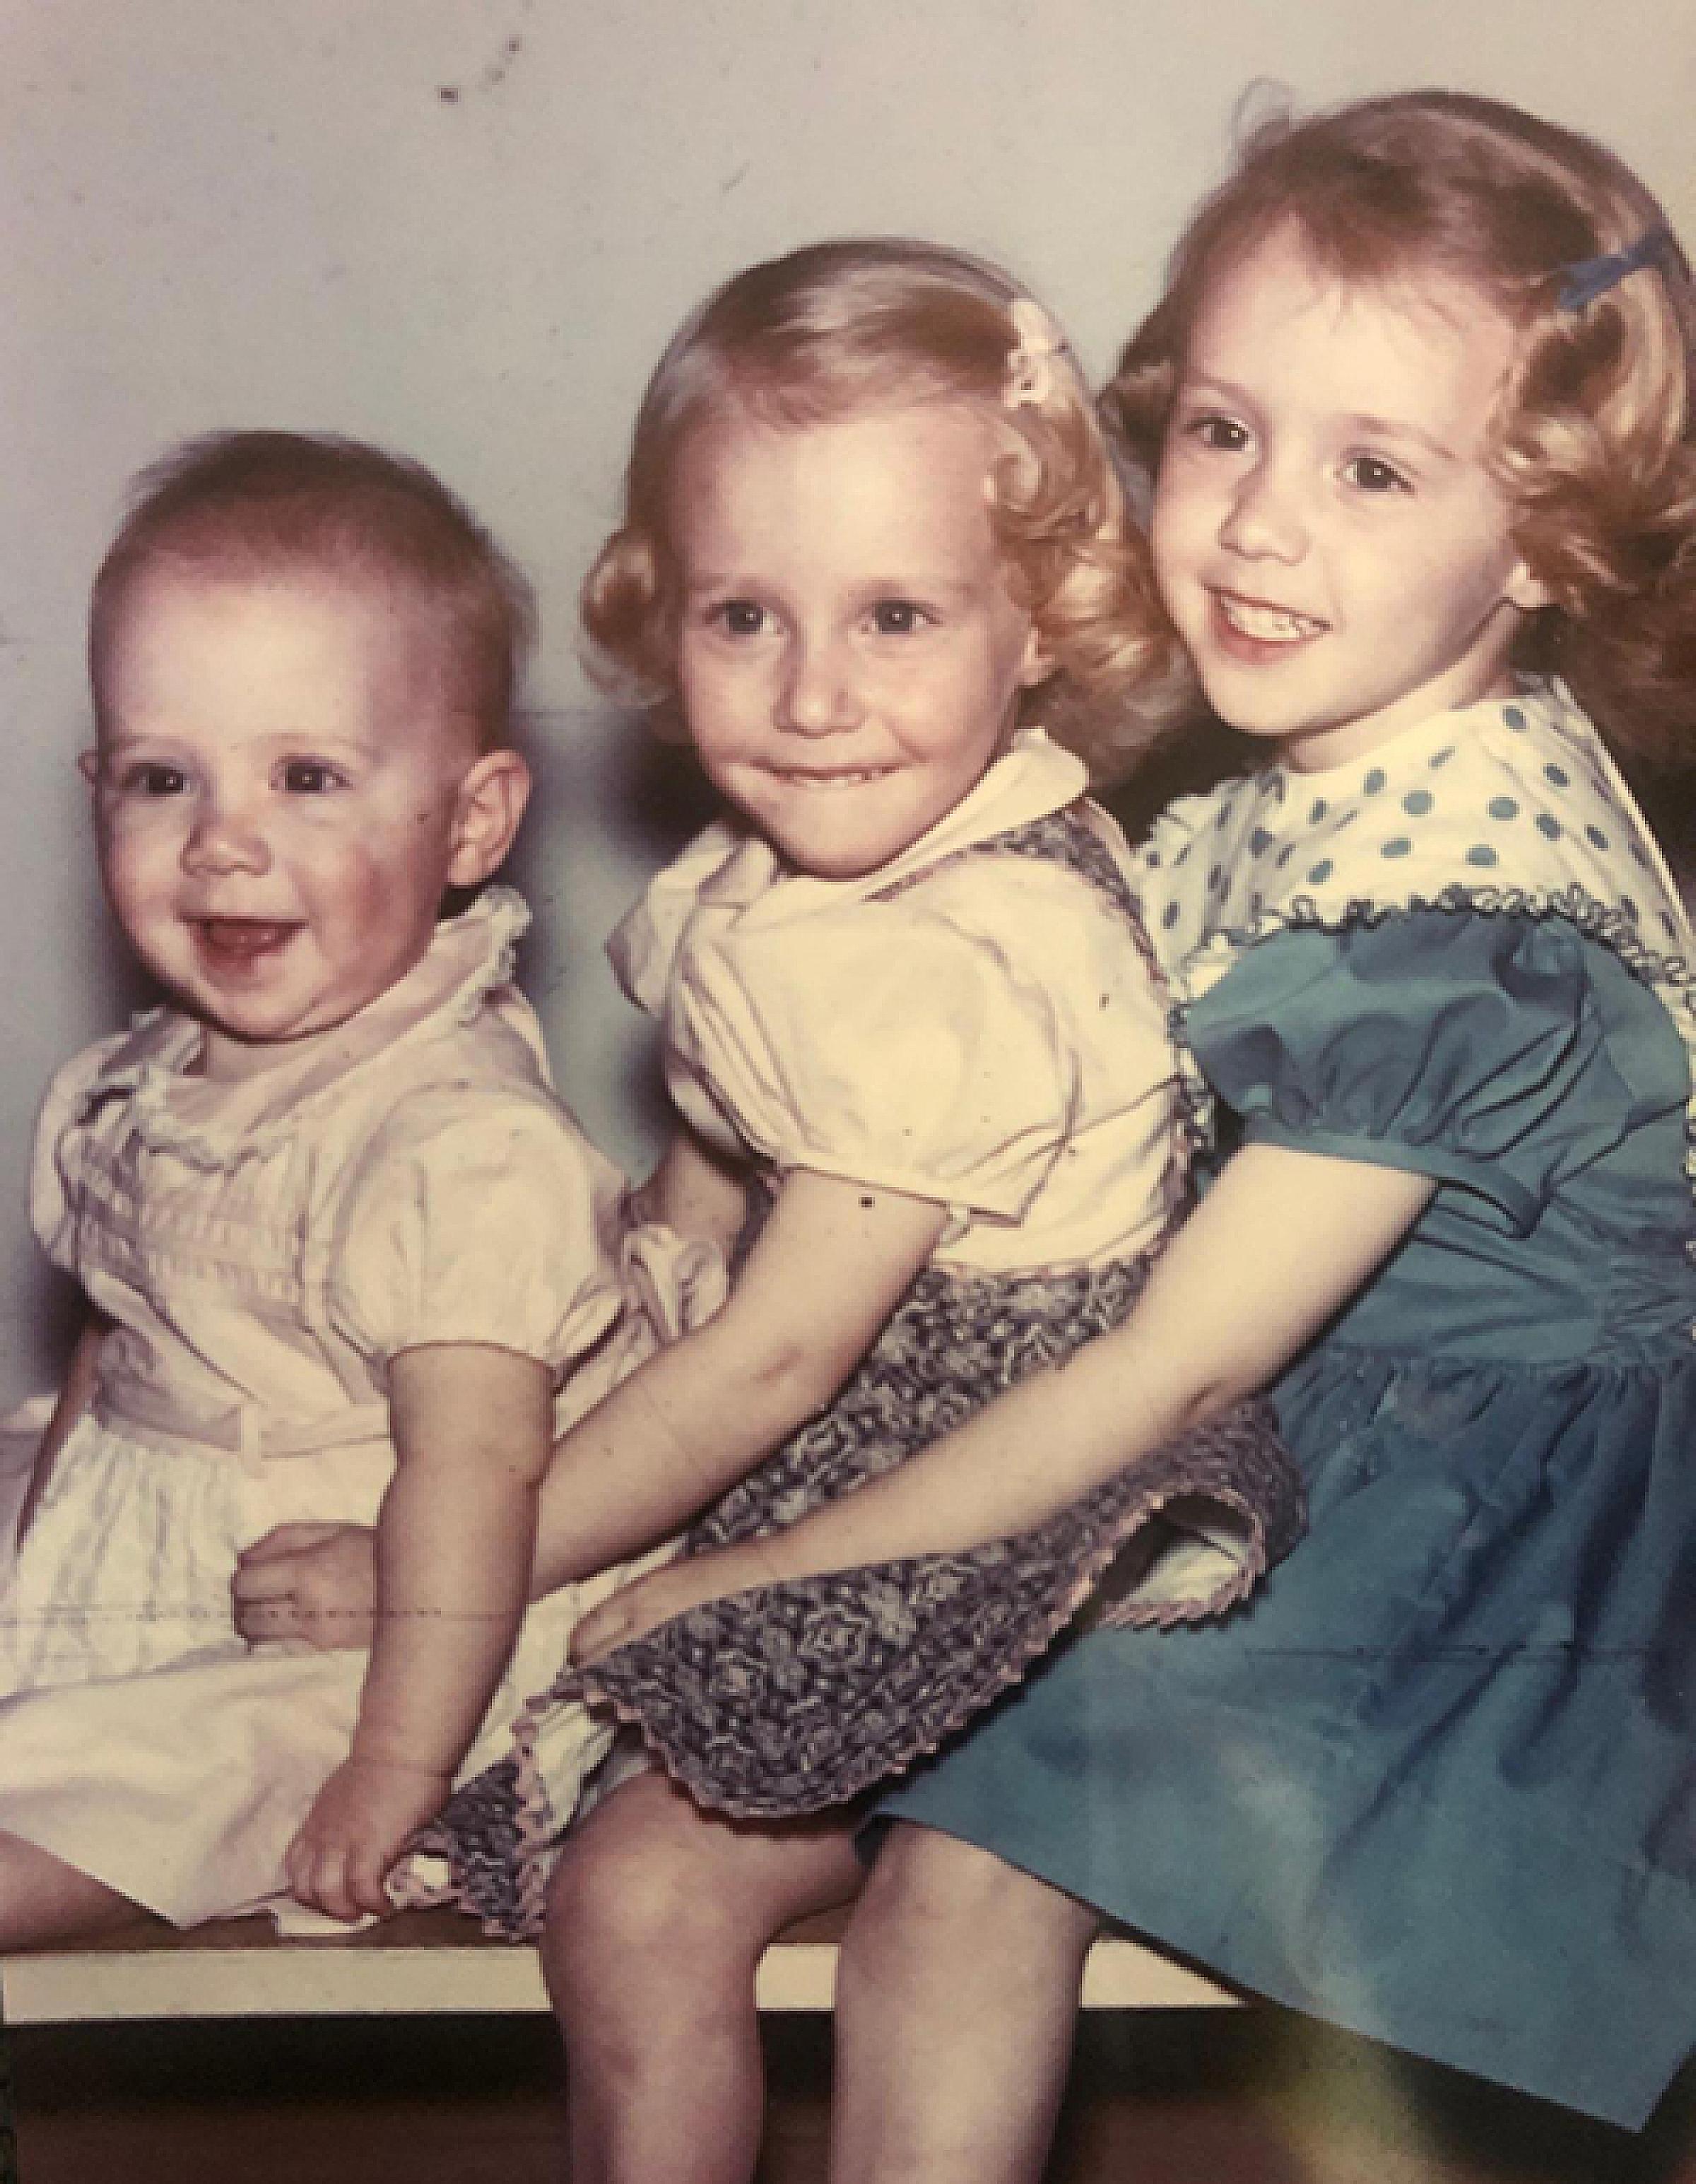 Mary, in the middle, and two of her sisters